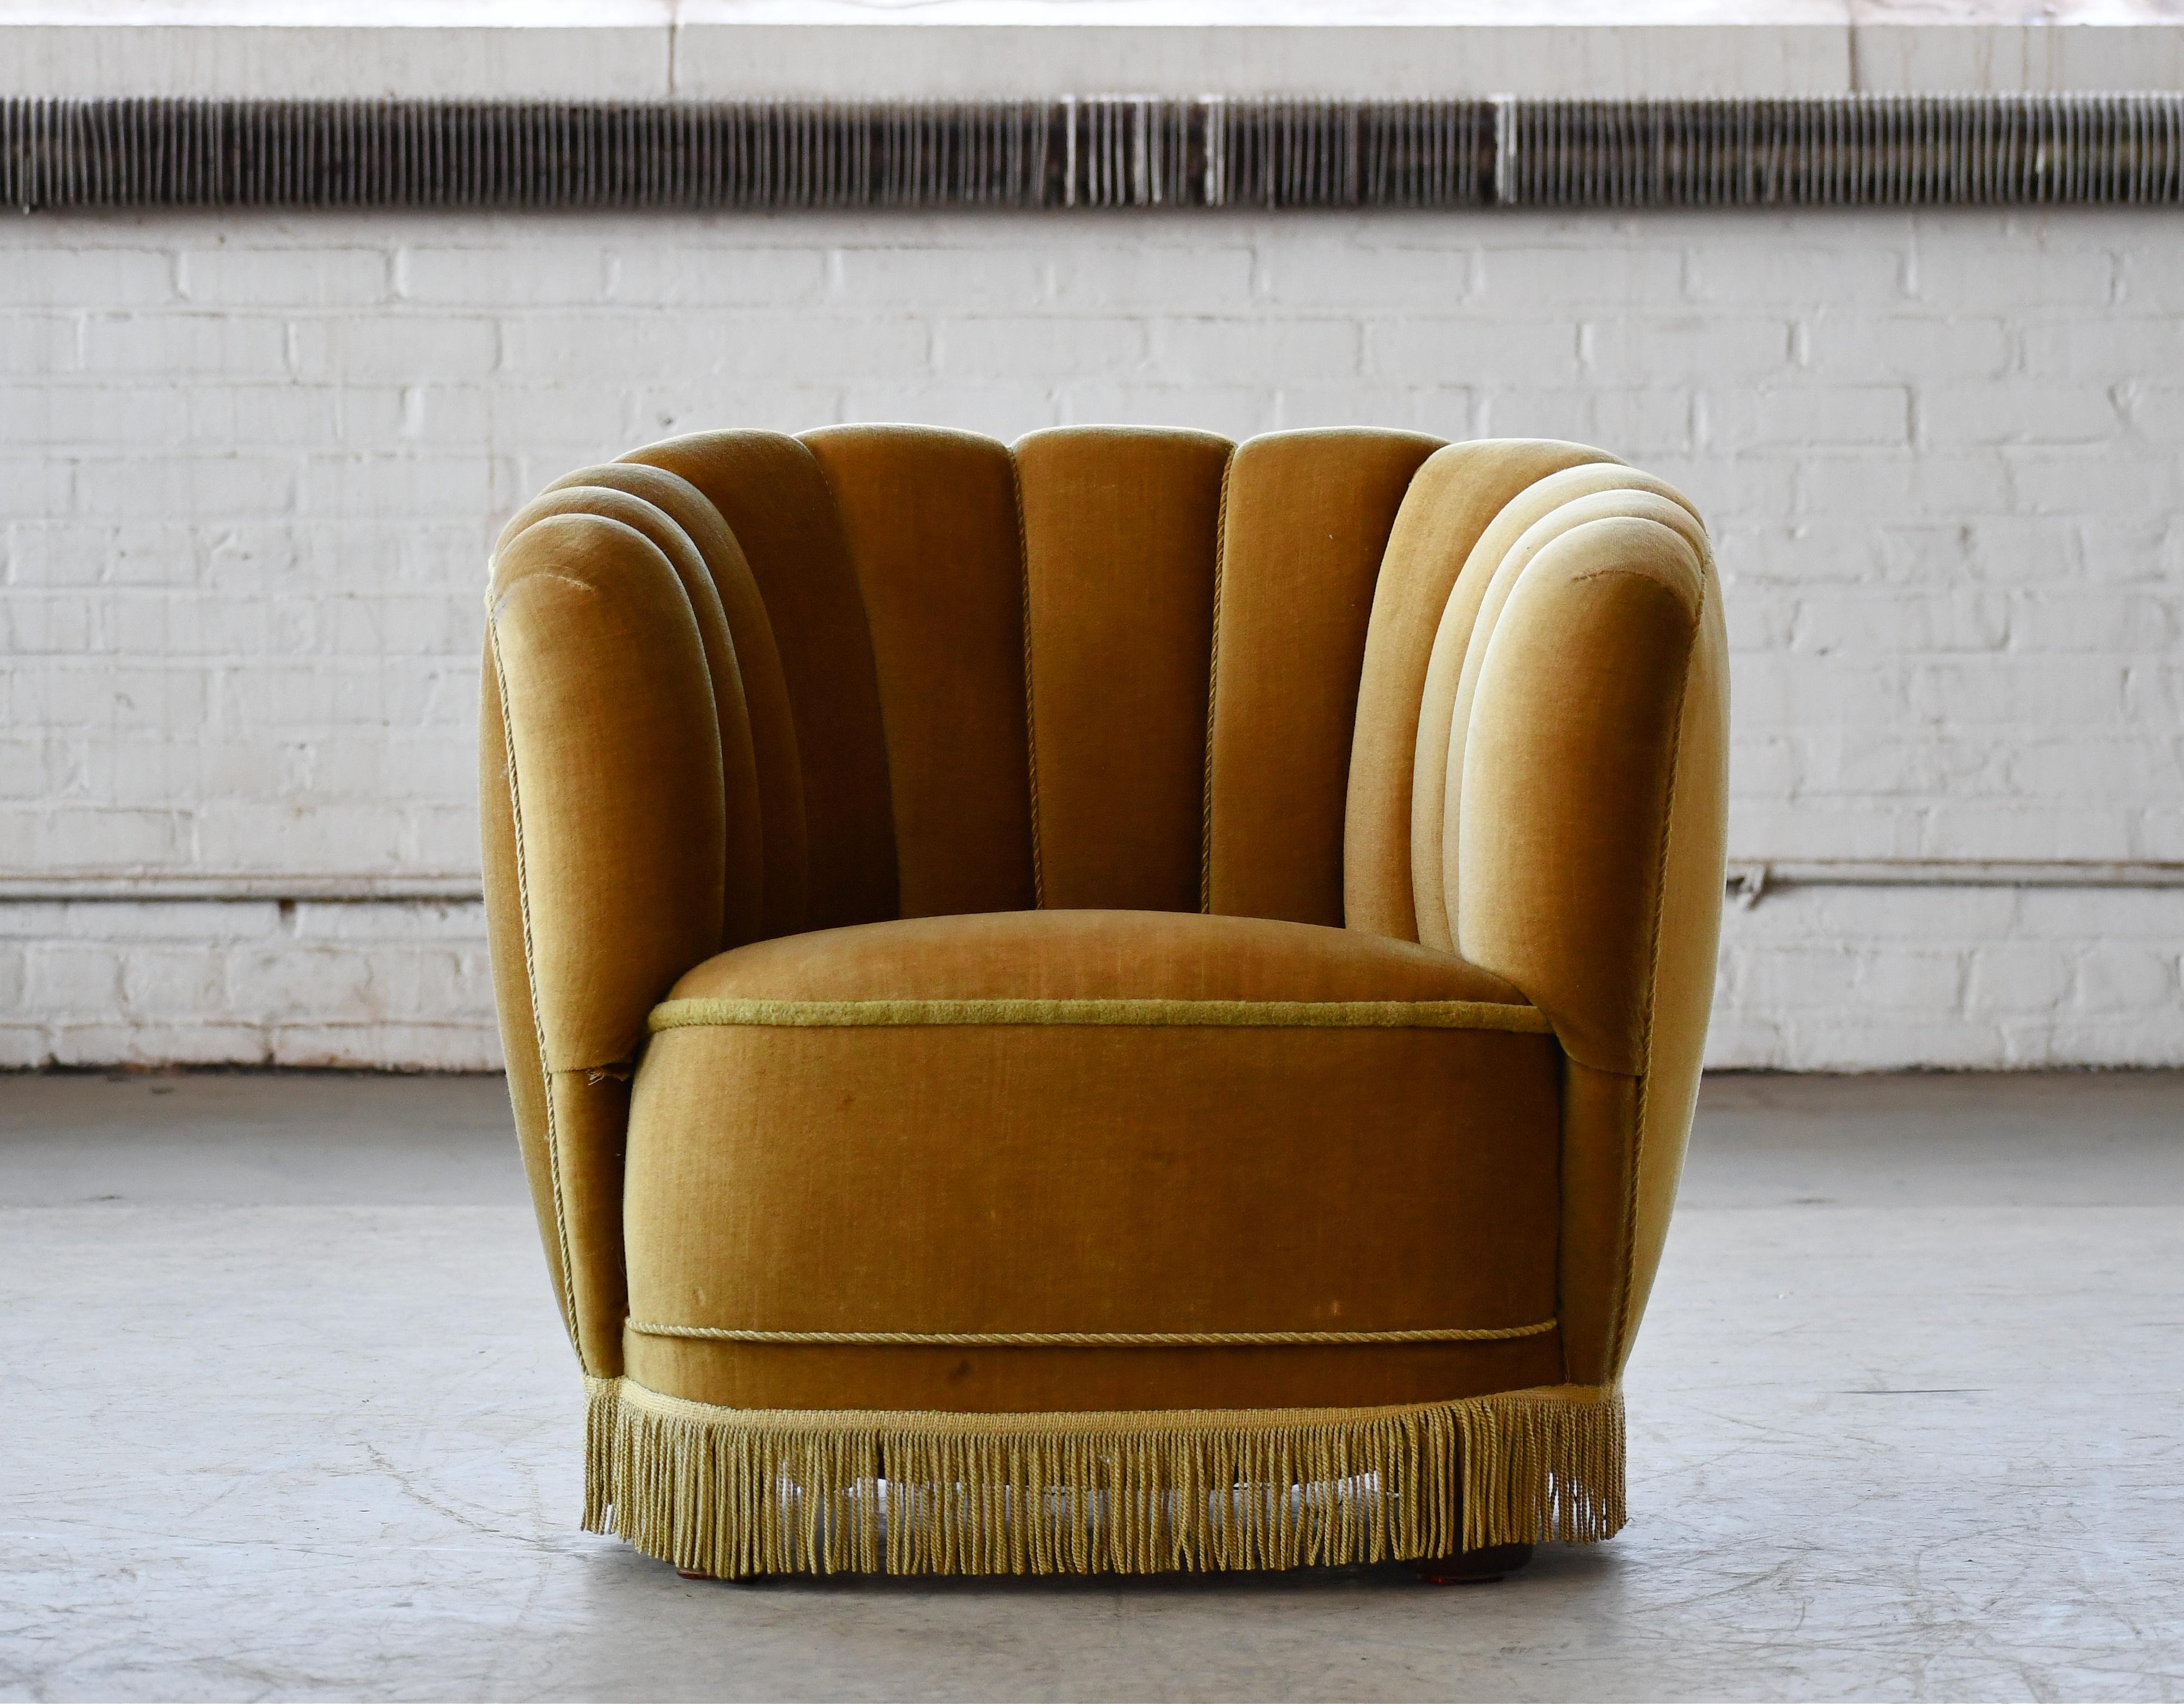 Comfortable, exuberant, and superbly made, this chair perfectly captures the essence of 1940s Danish design coming out of the late Art Deco era and into the early midcentury. The curved backrests and low slung proportions clearly hint at inspiration